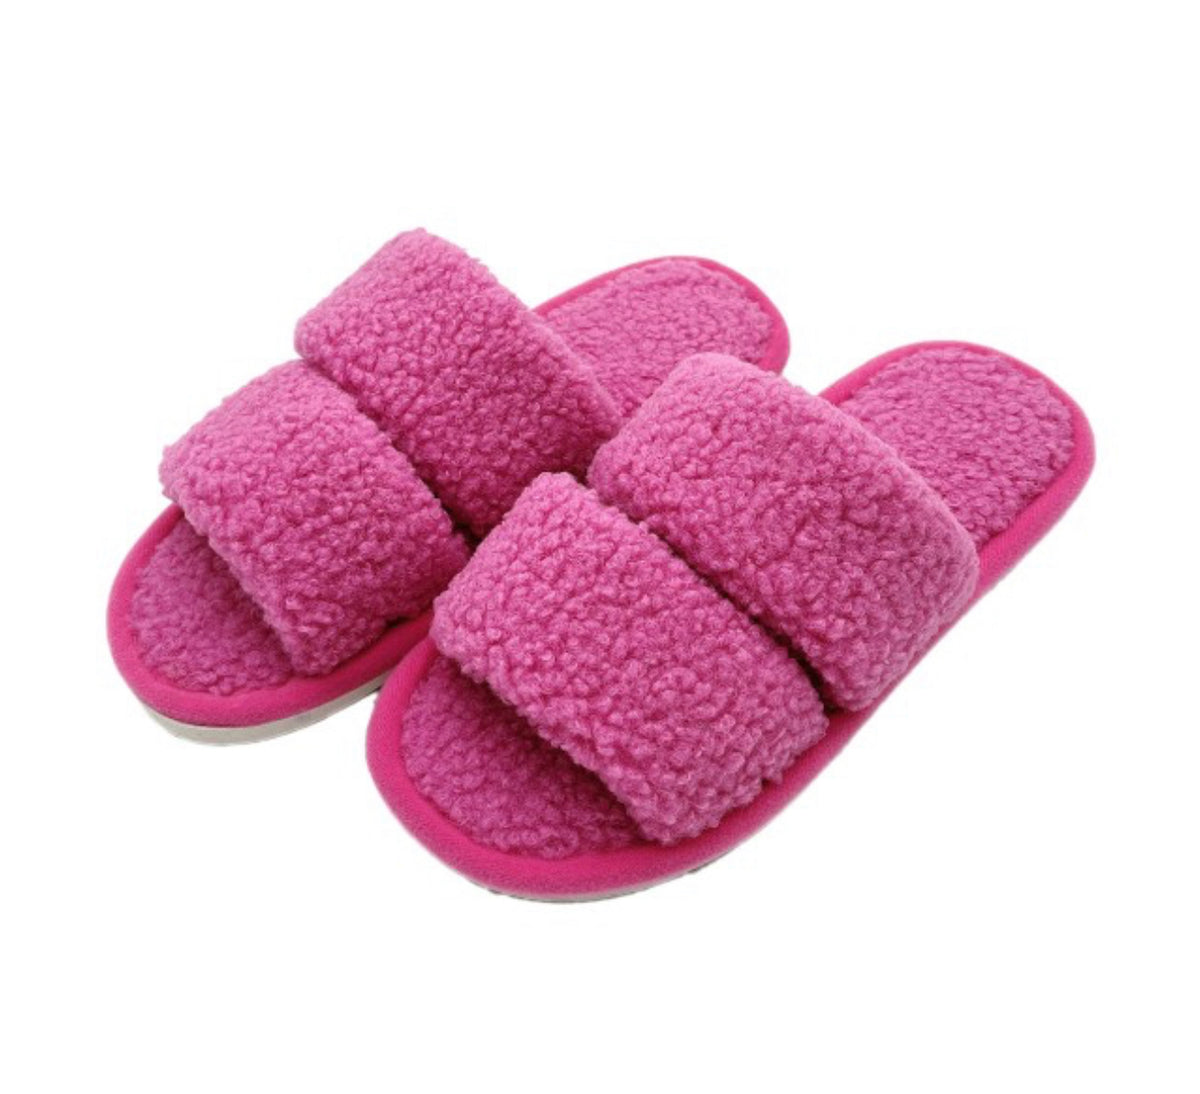 The Pink Barbie Slippers